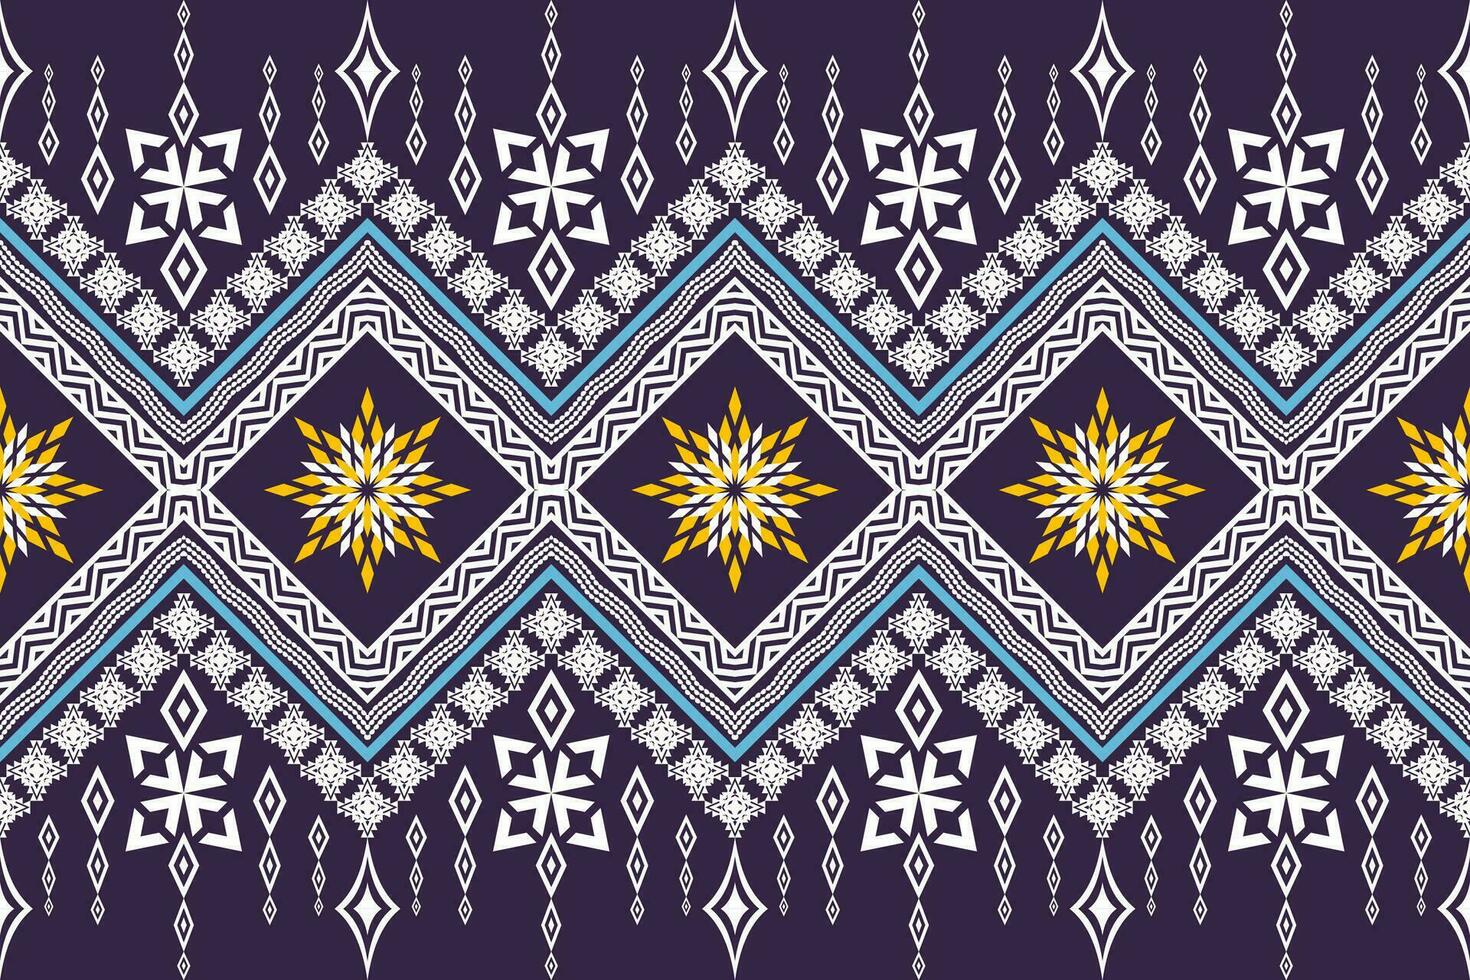 Ethnic Figure aztec embroidery style. Geometric ikat oriental traditional art pattern.Design for ethnic background,wallpaper,fashion,clothing,wrapping,fabric,element,sarong,graphic,vector illustration vector